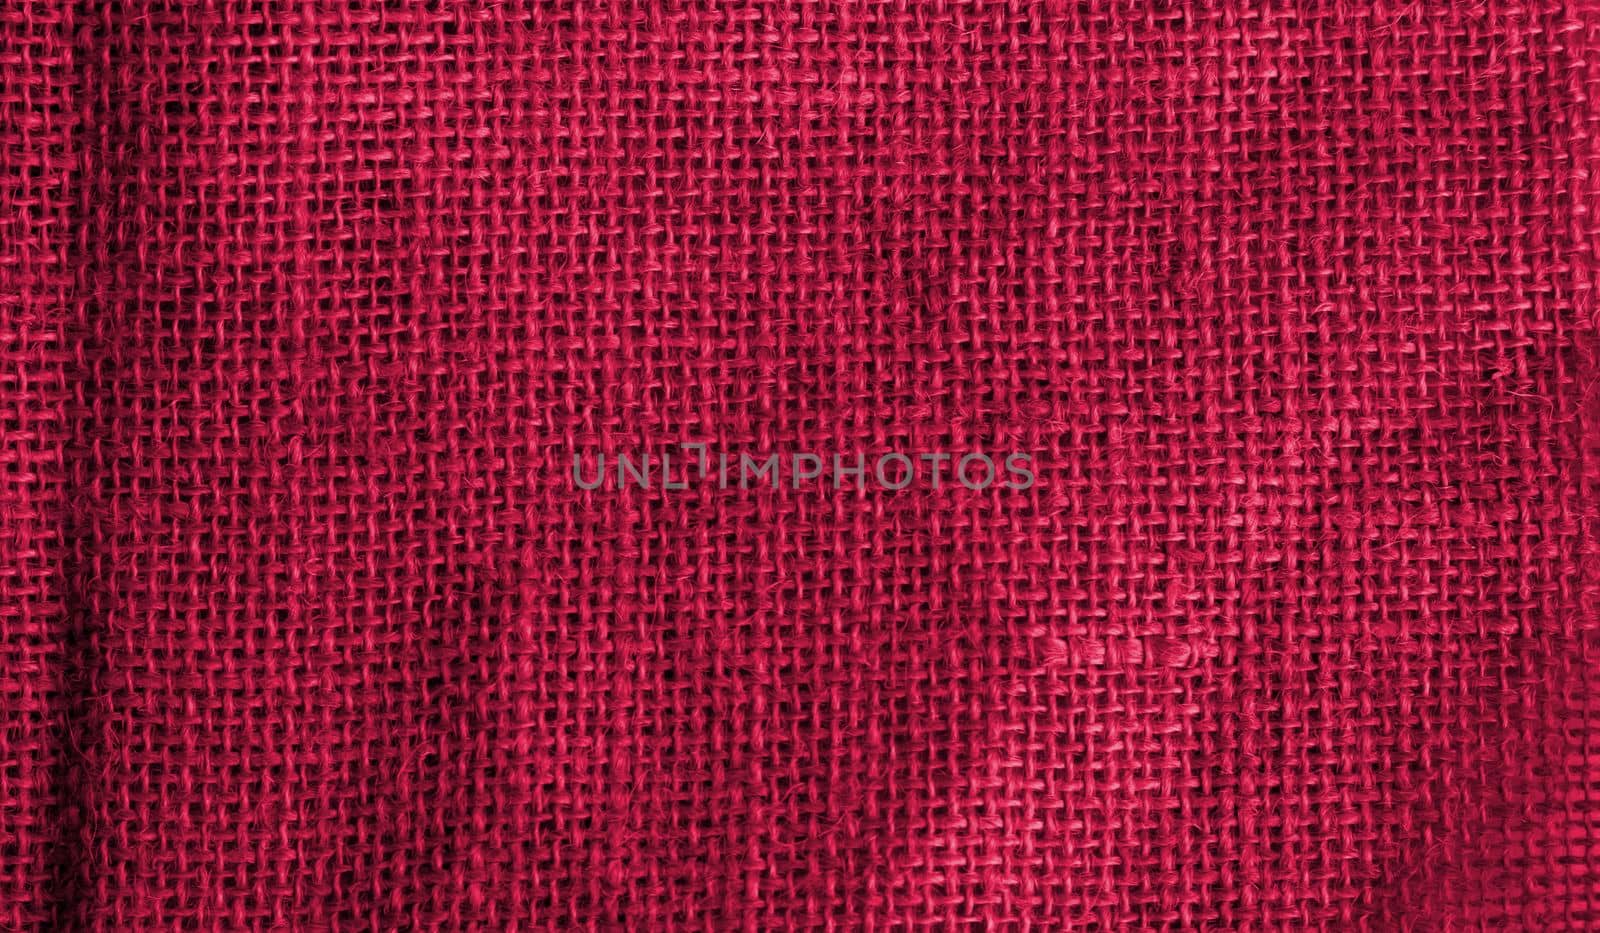 Viva Magenta burlap with a beautiful retro canvas texture as a vintage background.